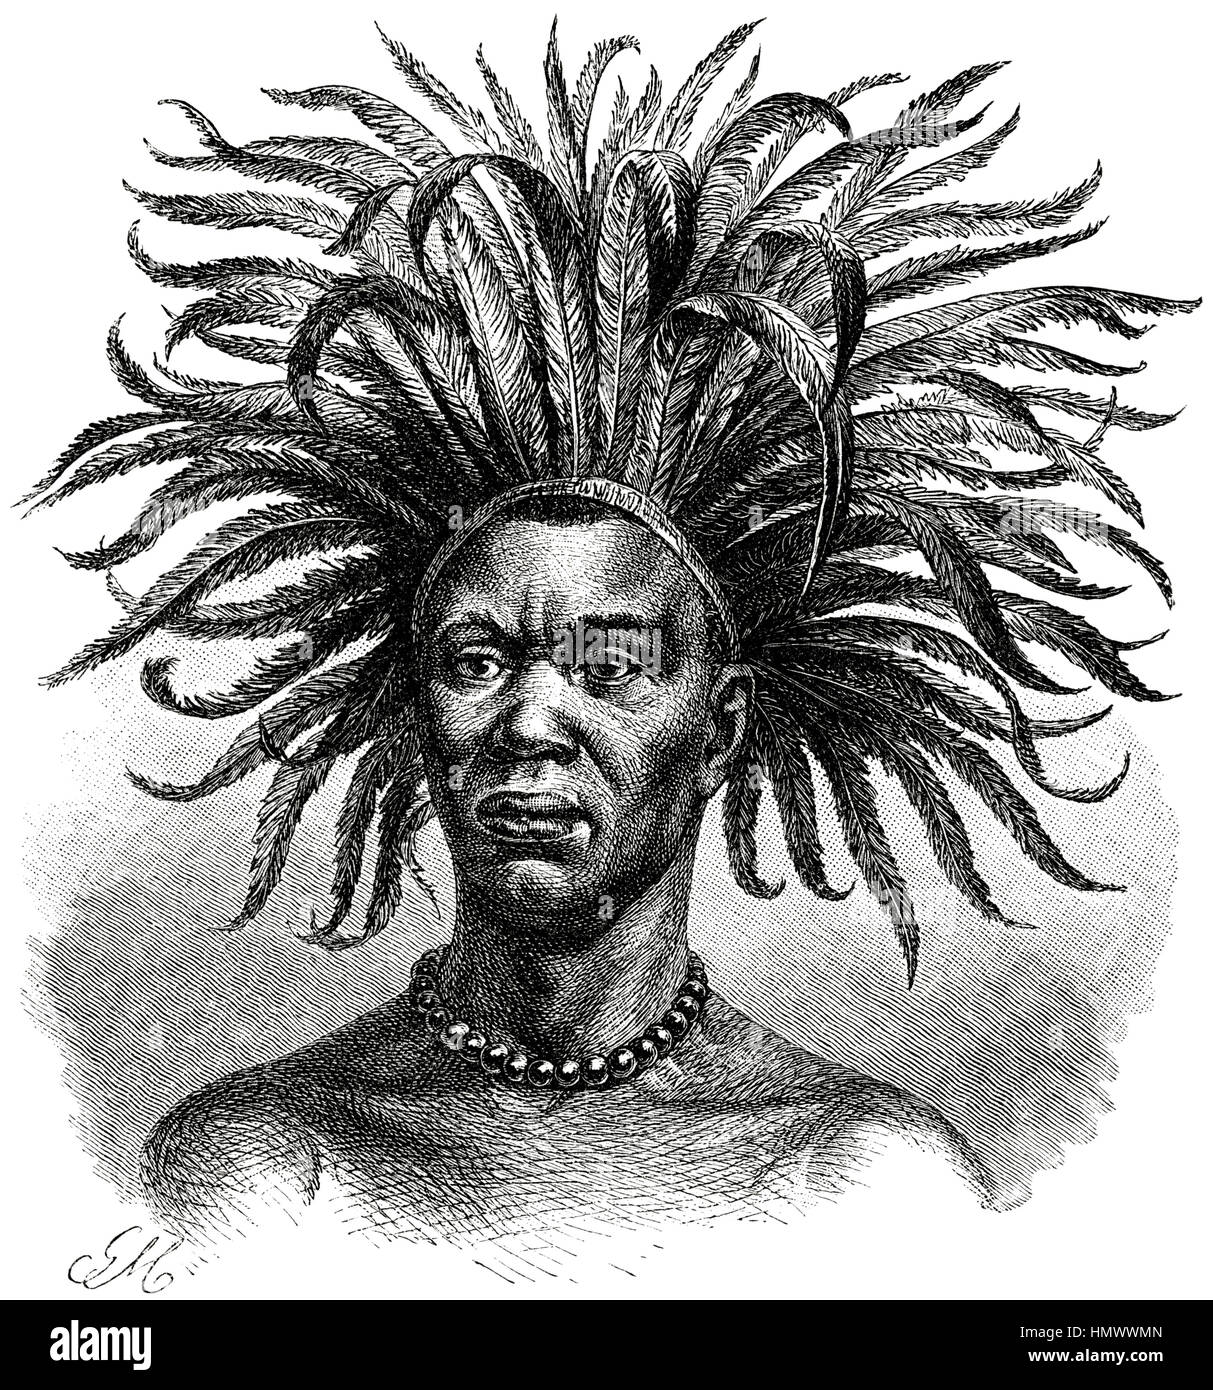 Young Mtuta Man with Feathered Headdress, Africa, Illustration from the book, 'Volkerkunde' by Dr. Fredrich Ratzel, Bibliographisches Institut, Leipzig, 1885 Stock Photo